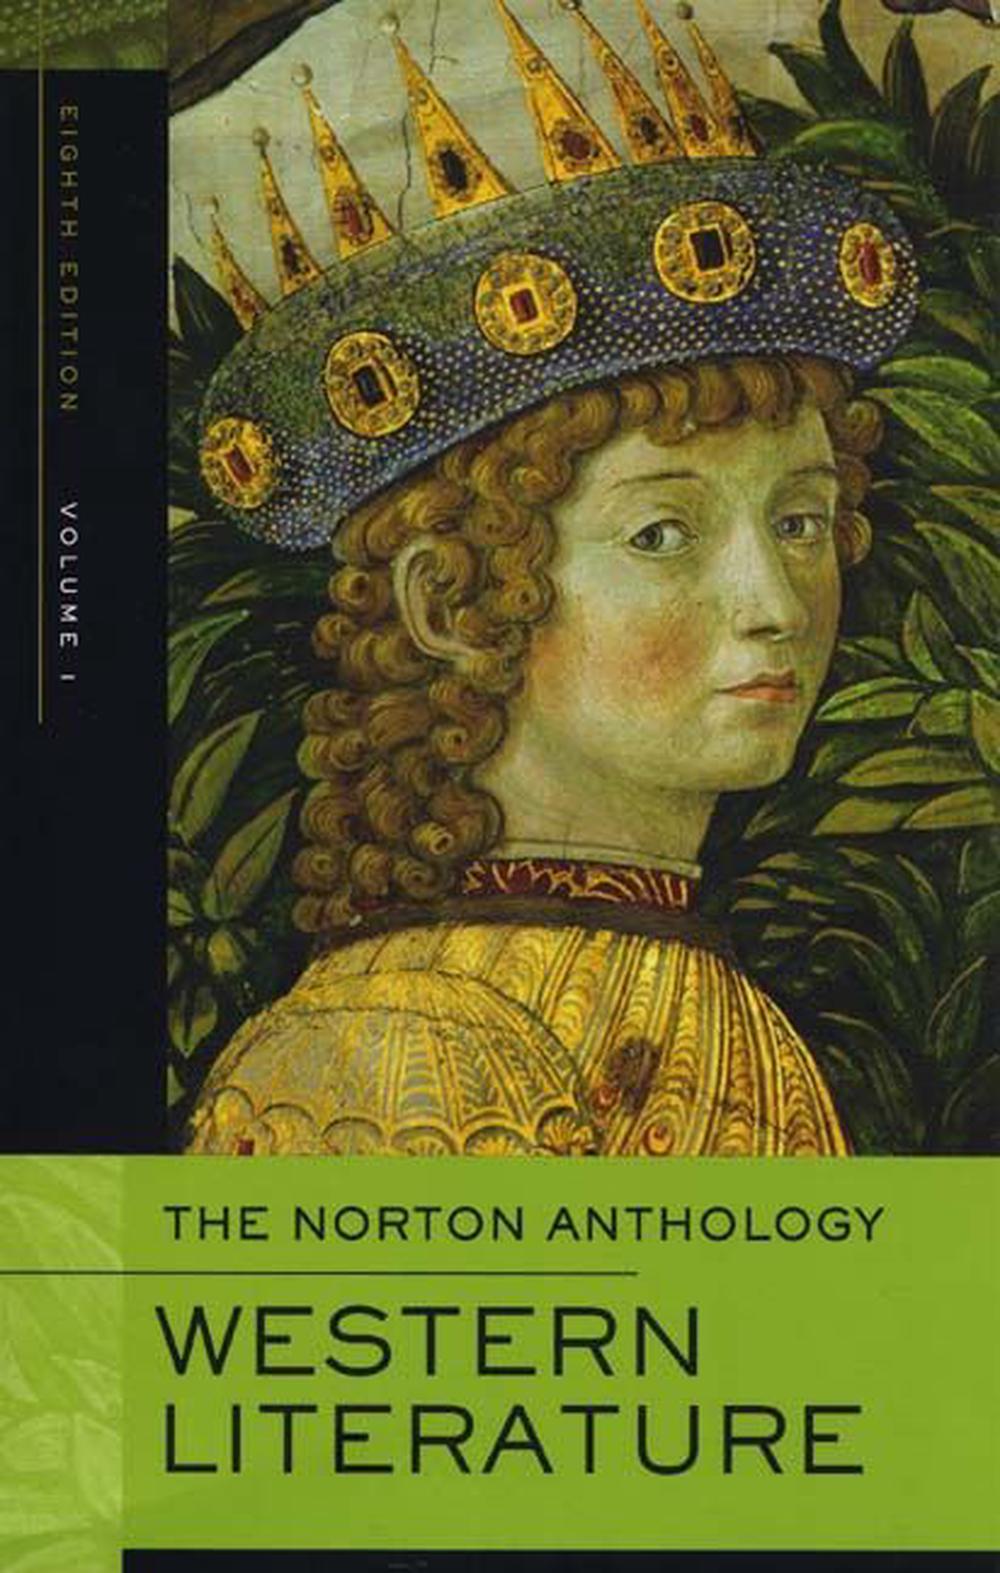 The Norton Anthology of Western Literature by Sarah Lawall, Paperback